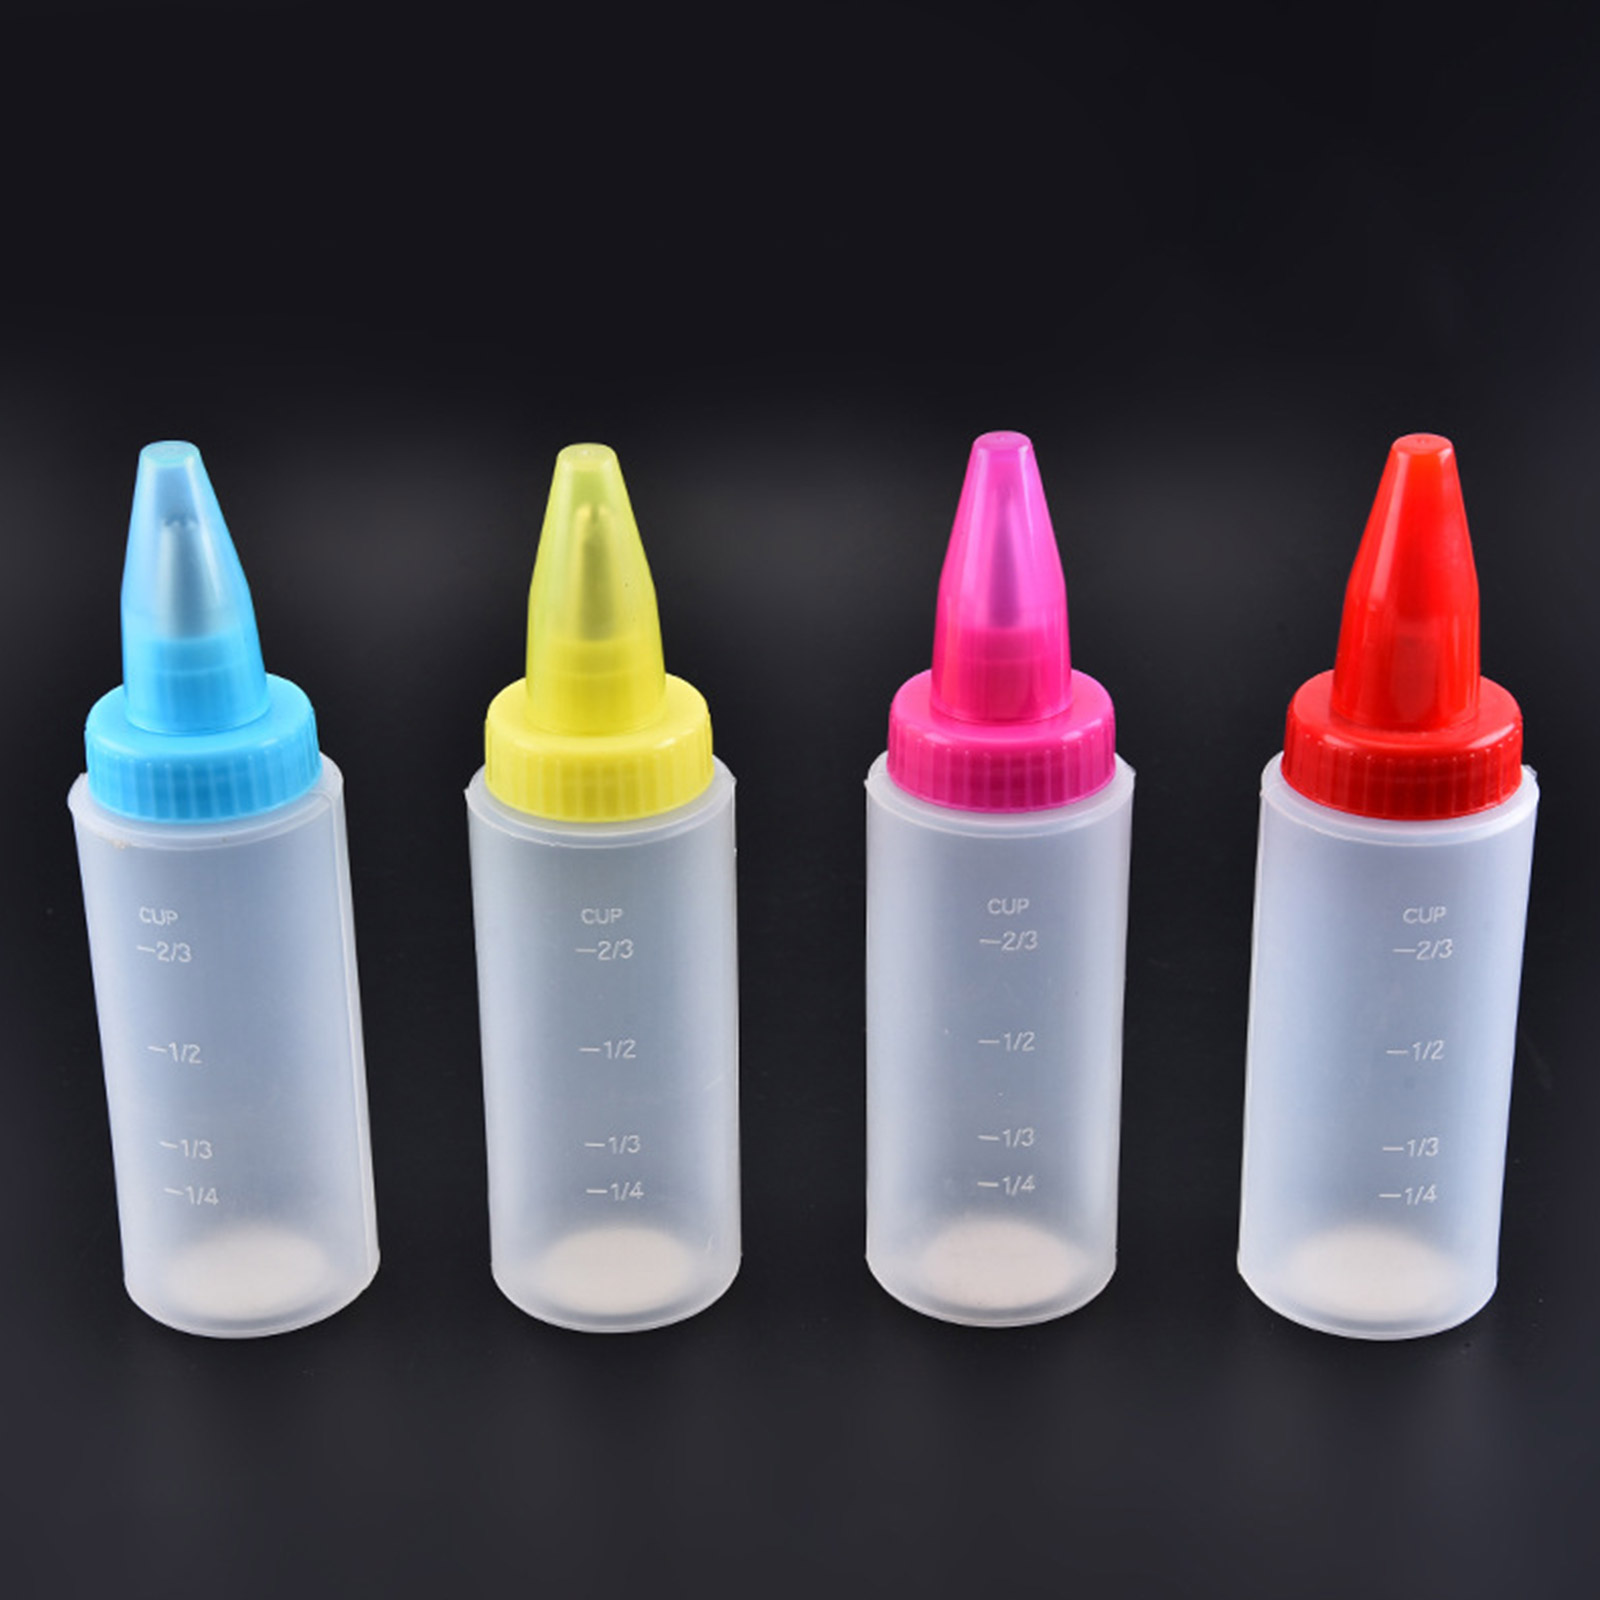 Whigetiy Icing Bottle Soft Squeeze for Icing, Ketchup, Frosting, Cookie  Decorating, Sauces for DIY Cupcake Cake Sugarcraft Baking 